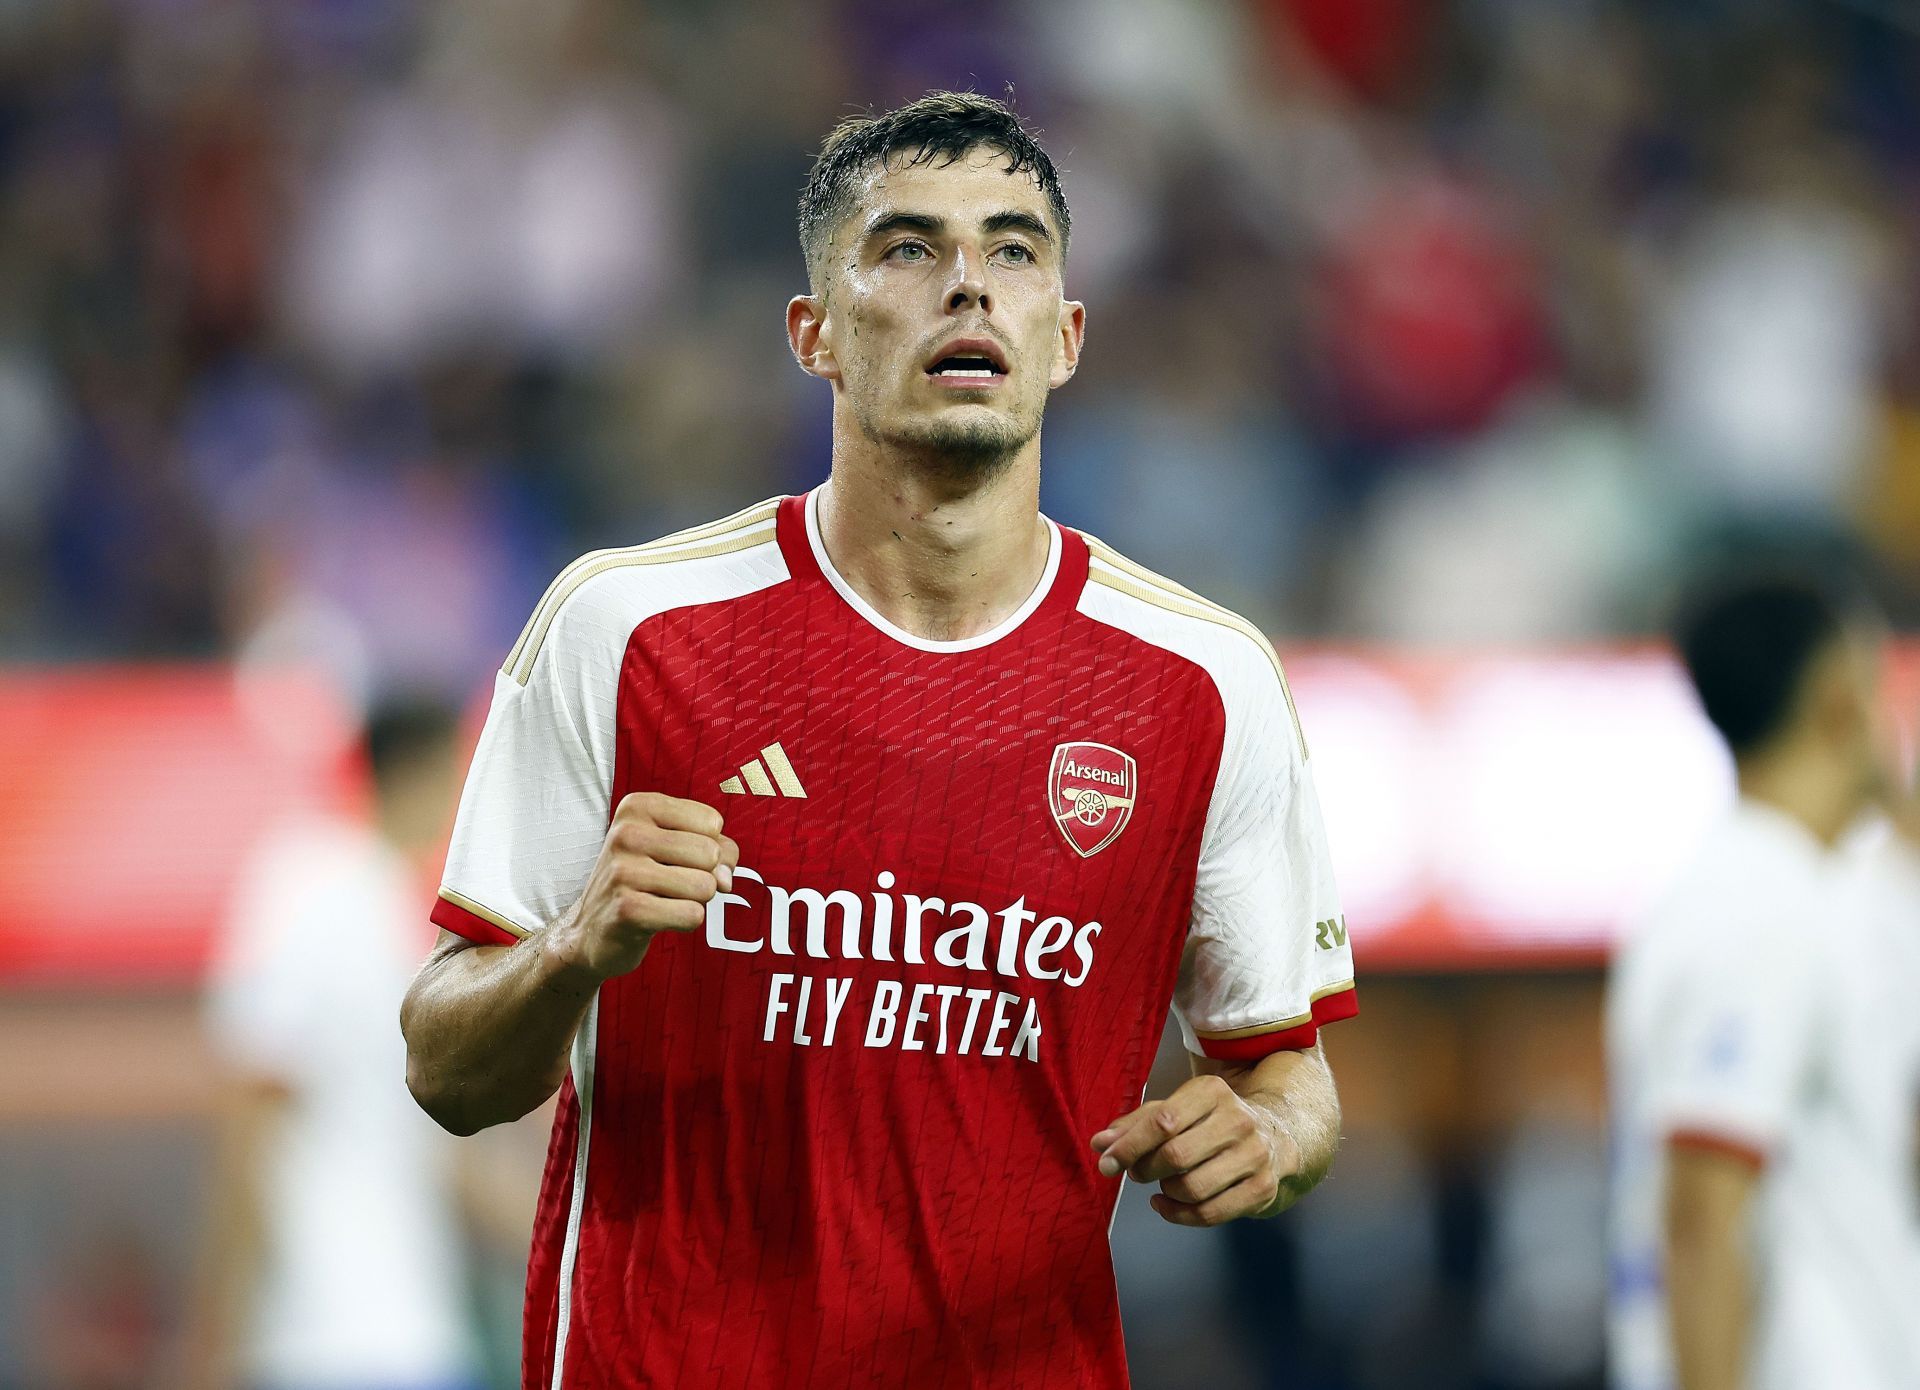 Havertz claims that life at Arsenal is completely different from Chelsea